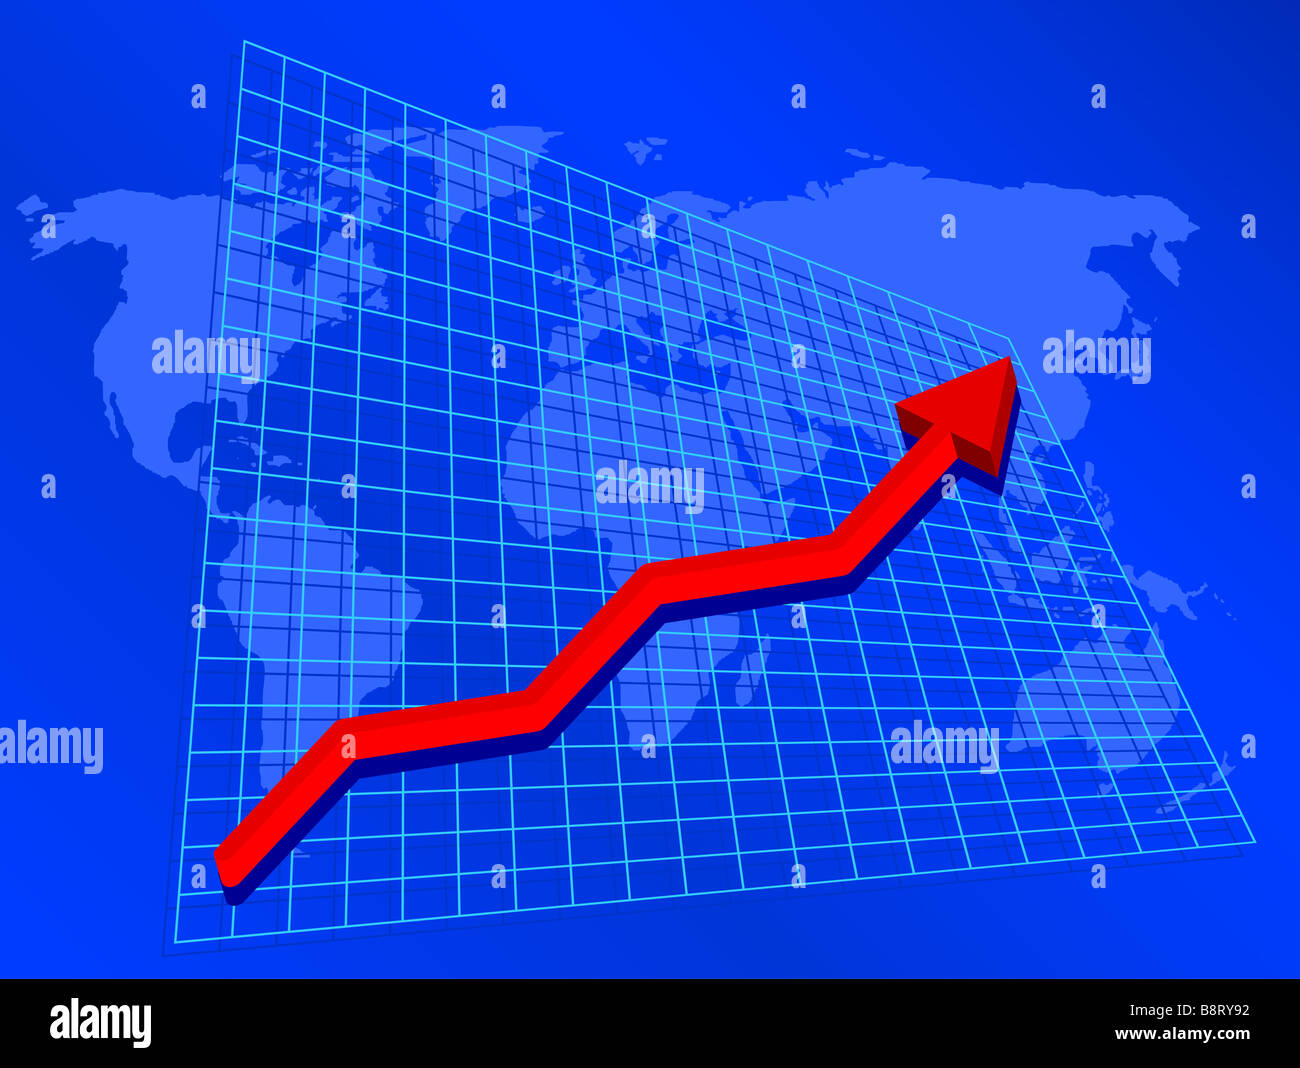 Background showing graph with rising profits on world map Stock Photo